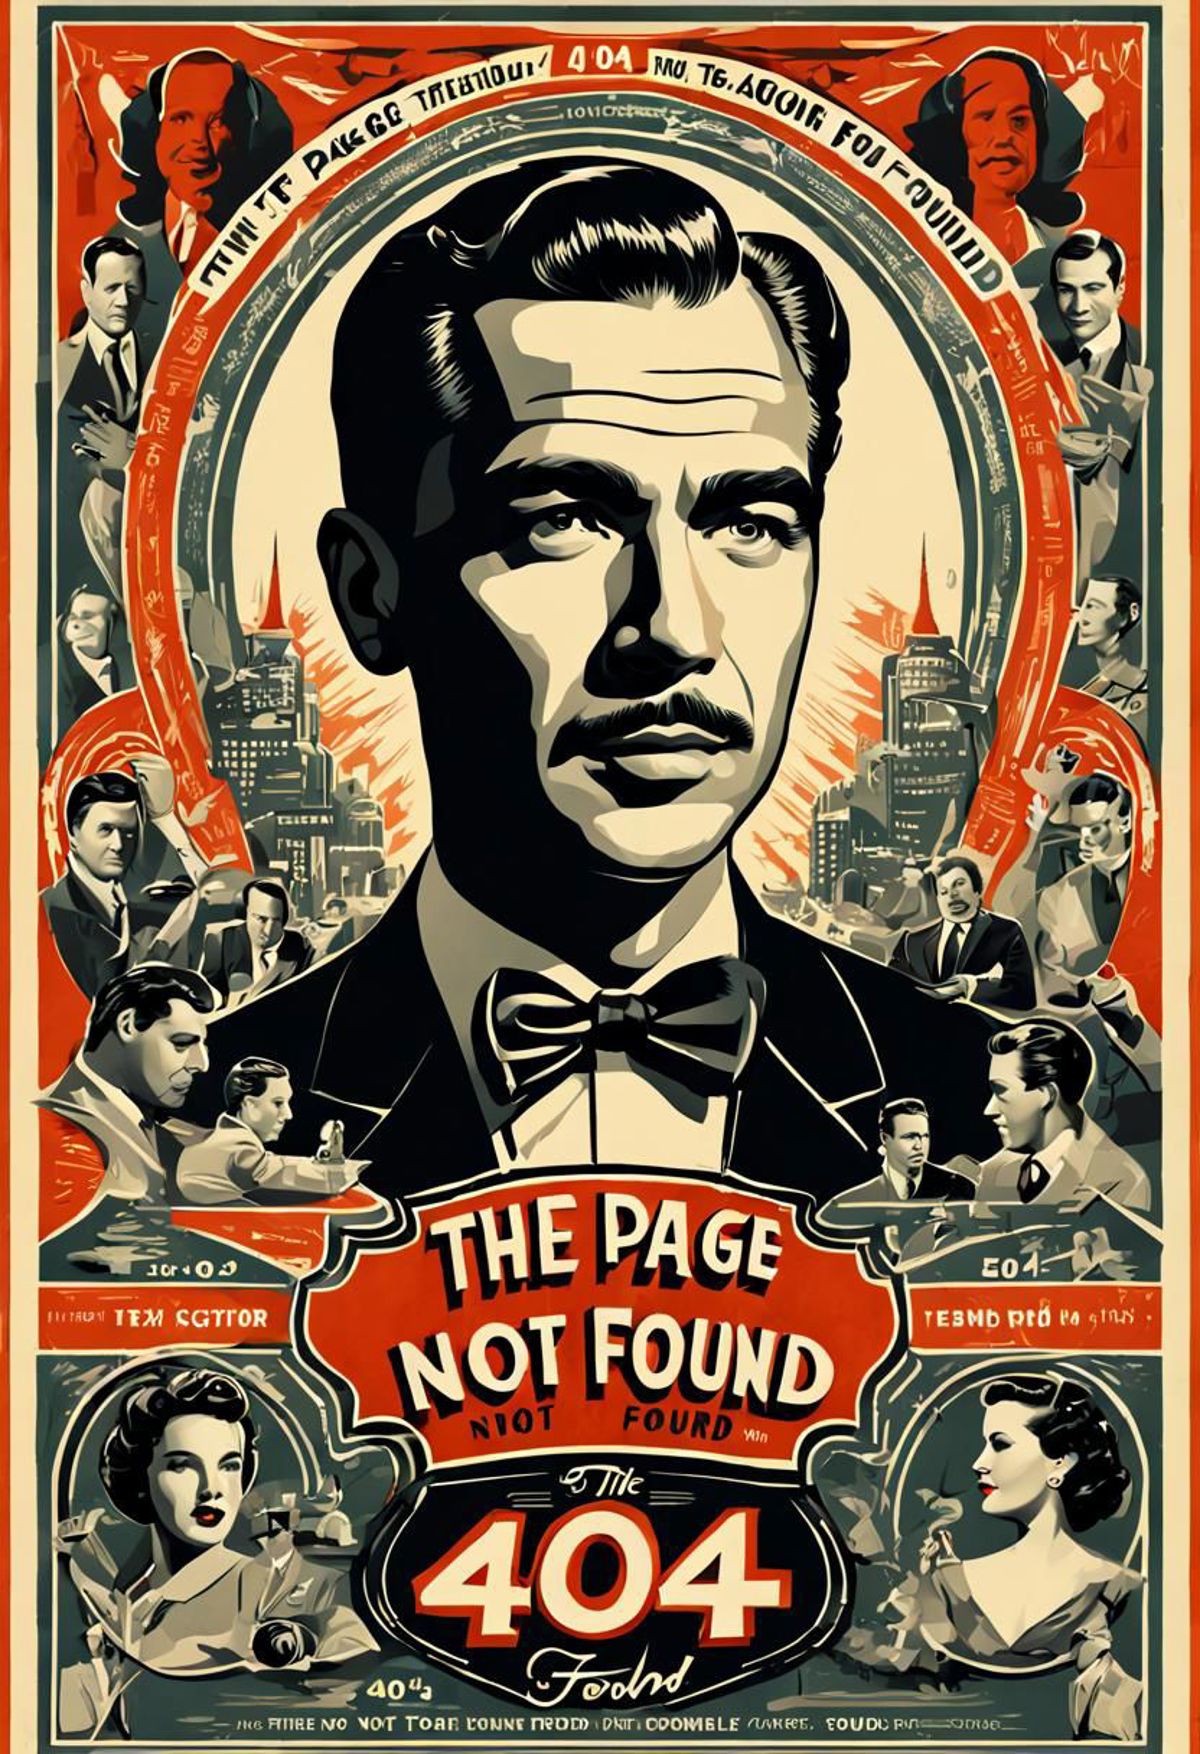 The Page Not Found Poster Featuring a Man in a Tuxedo